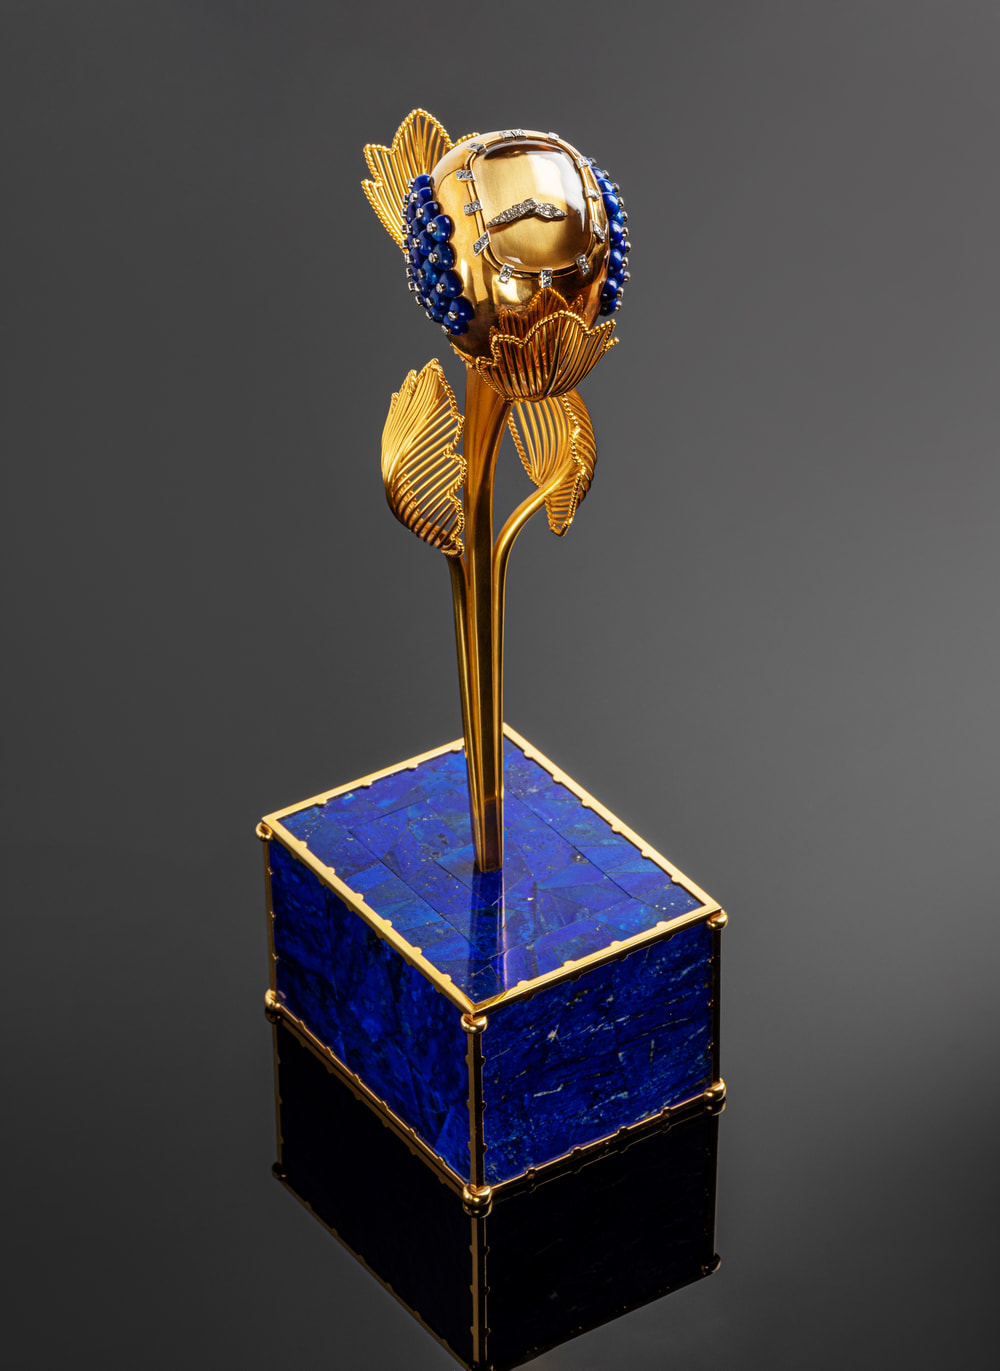 Desk or console clock in 18kt yellow gold styling a flower, mechanical movement, stem and leaves in yellow gold, work by Cartier Paris Circa 1950.